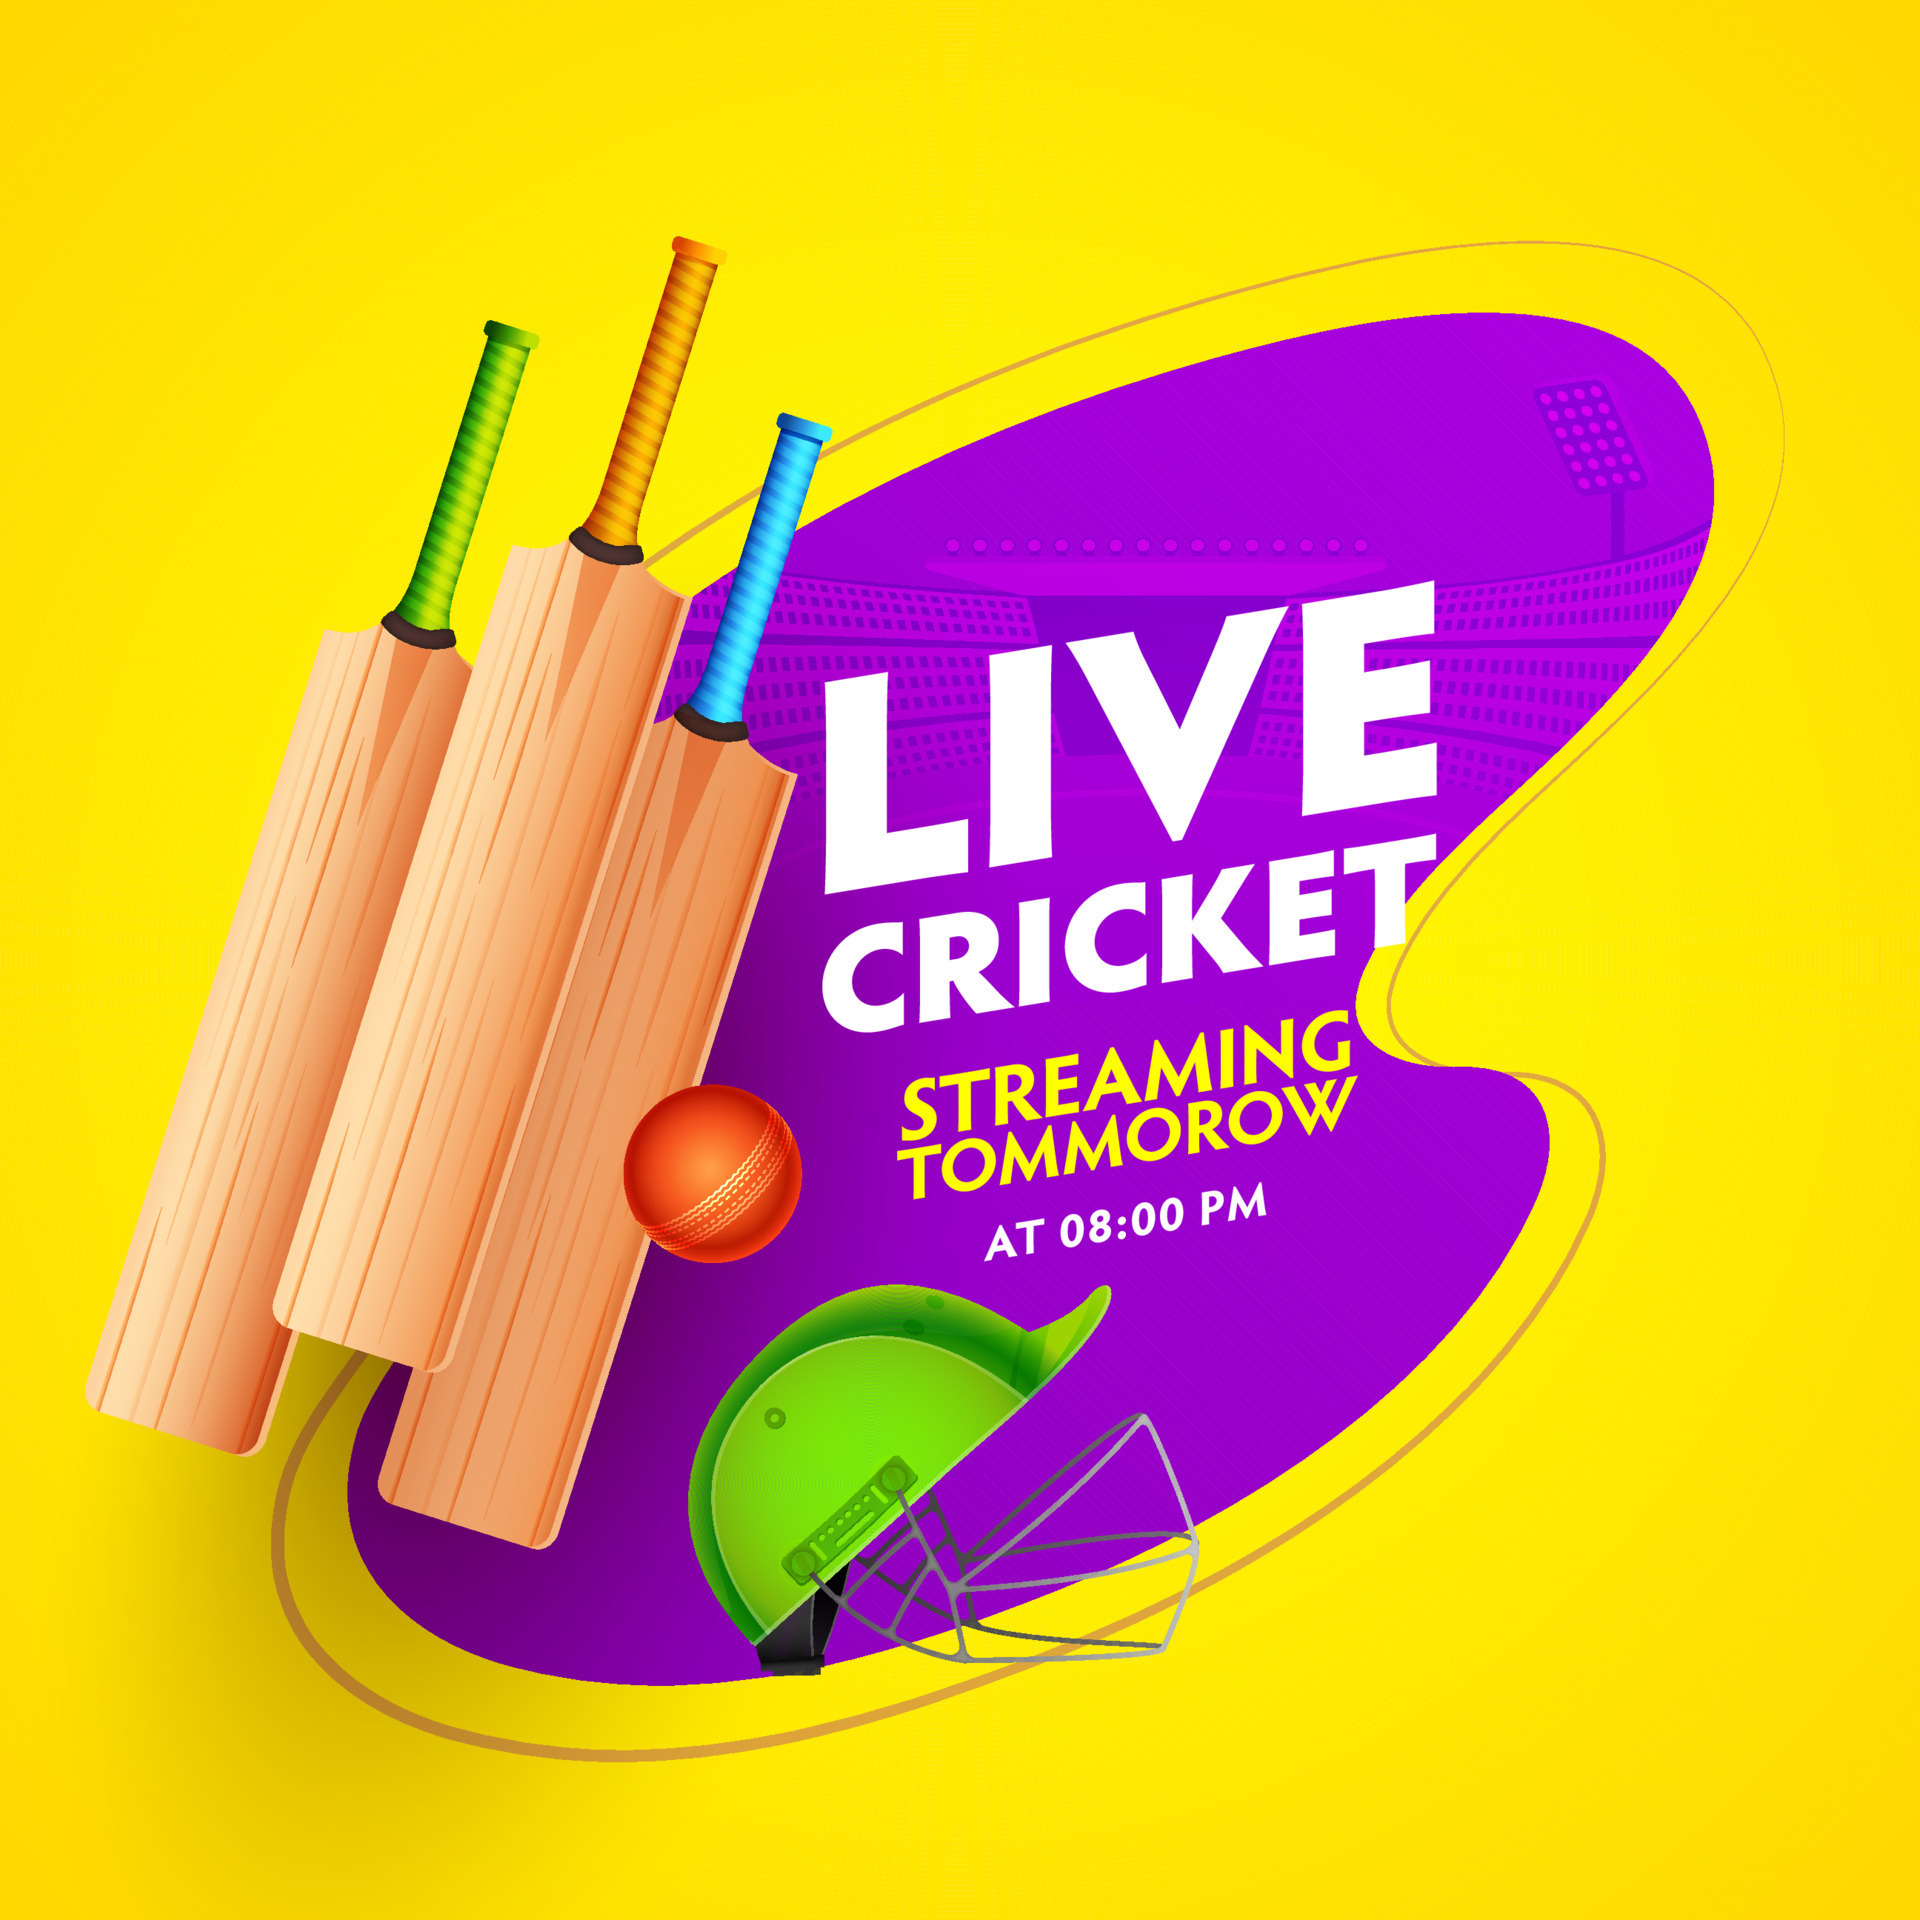 Live Cricket Streaming Match Poster Design with Realistic Equipments and Purple Stadium View on Yellow Background